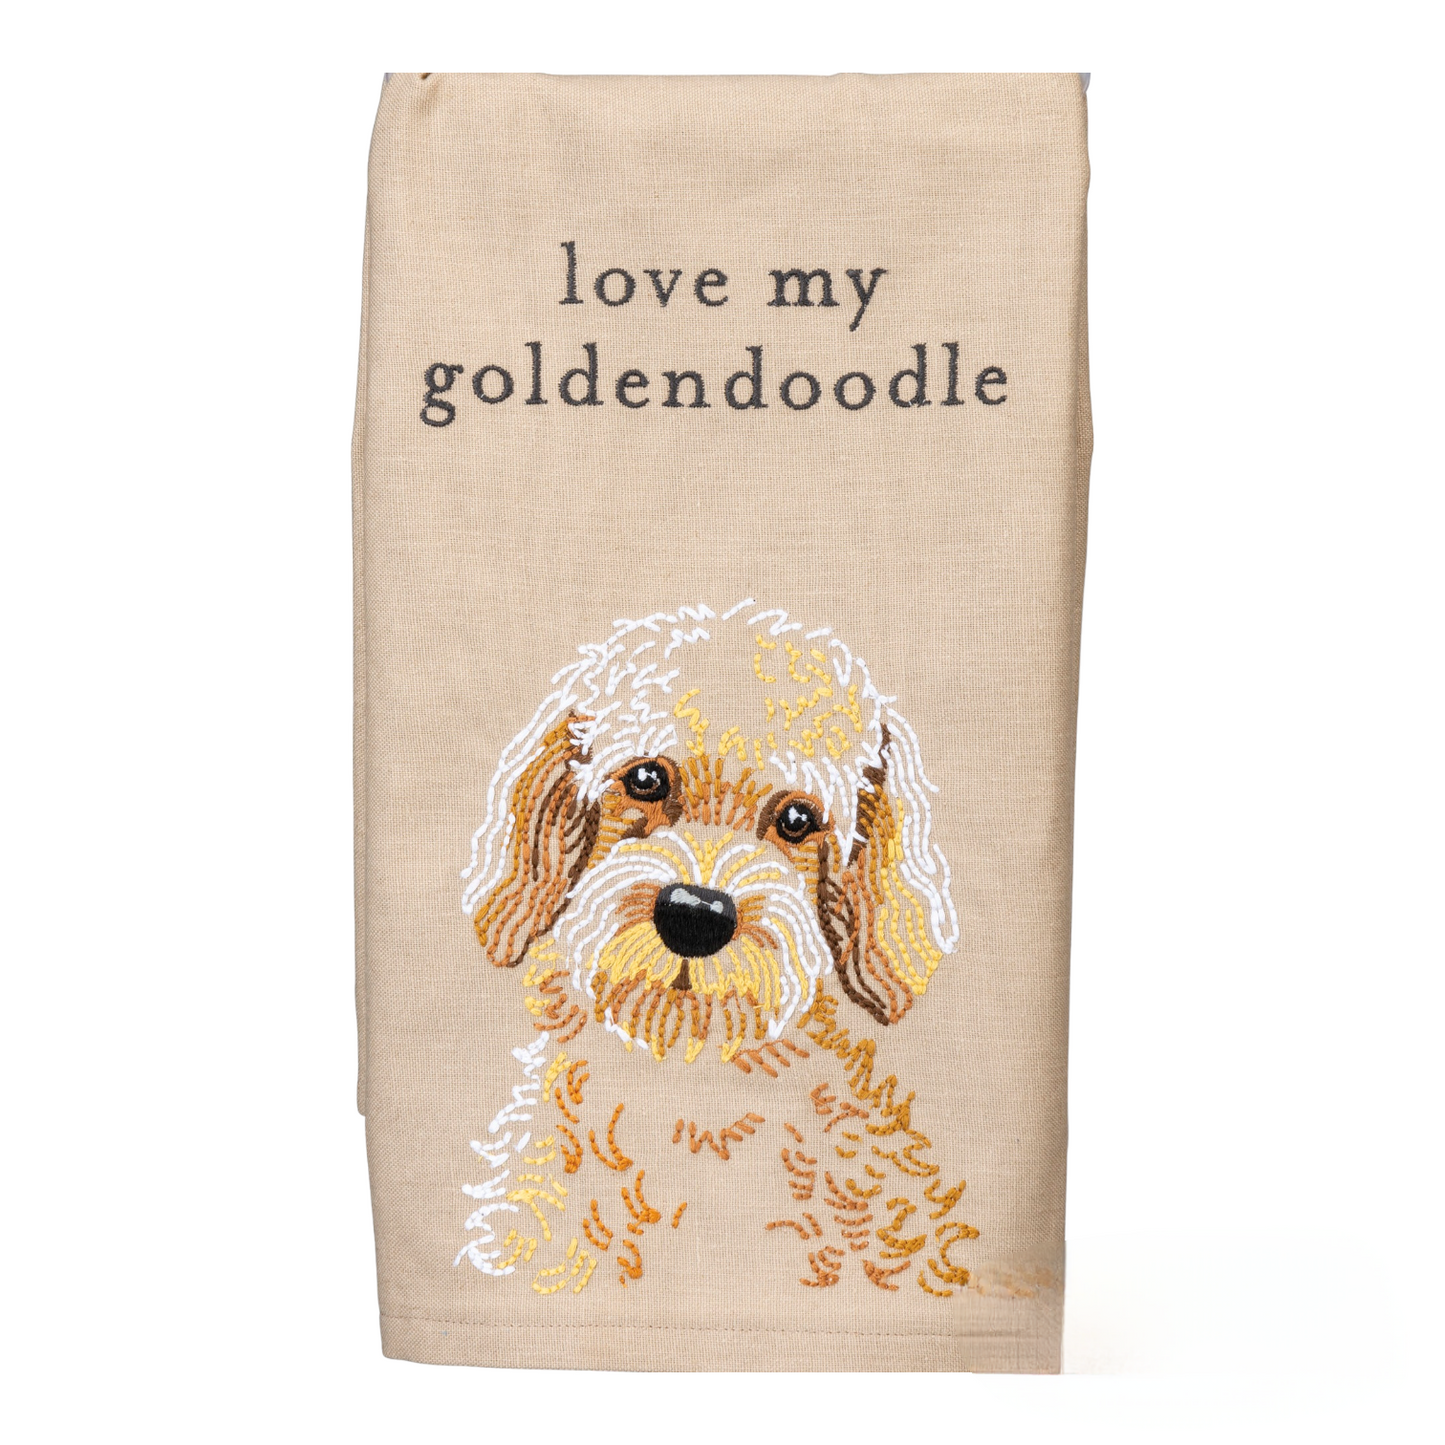 "Love My Goldendoodle" - Dog themed Kitchen Towel.